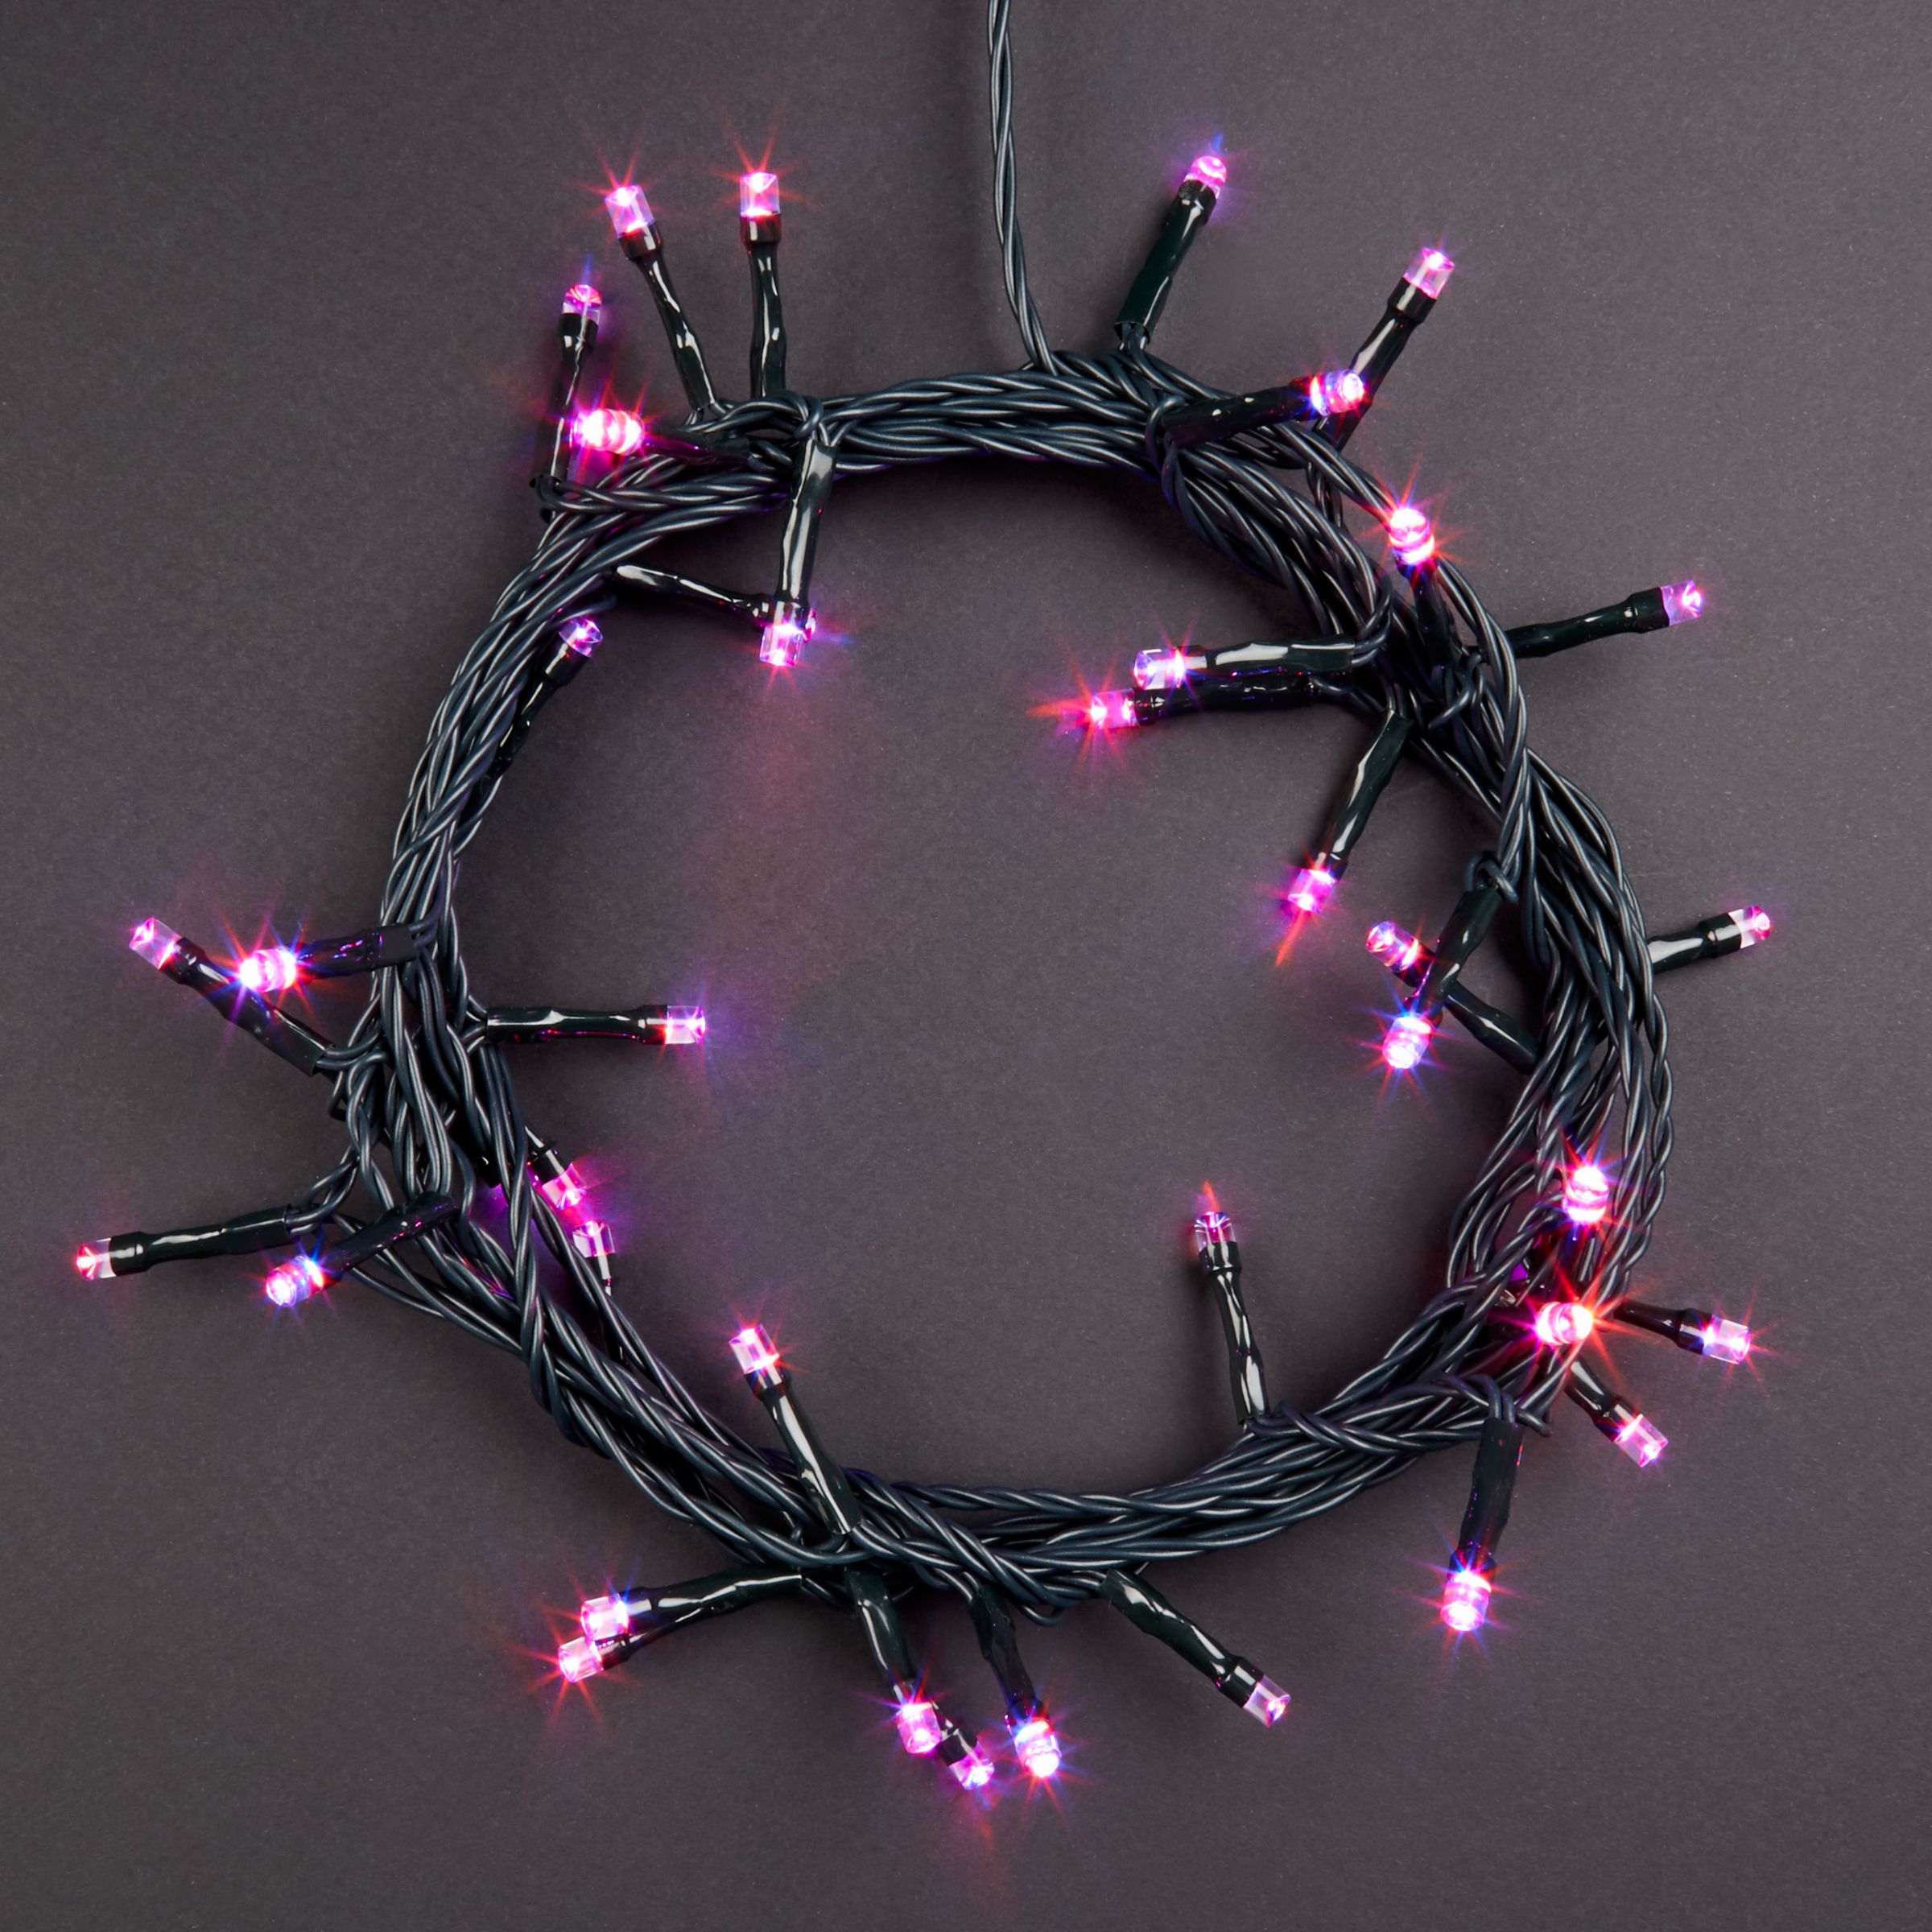 Twinkly 175 App-Controlled LED Christmas Lights, Warm White L17.5m